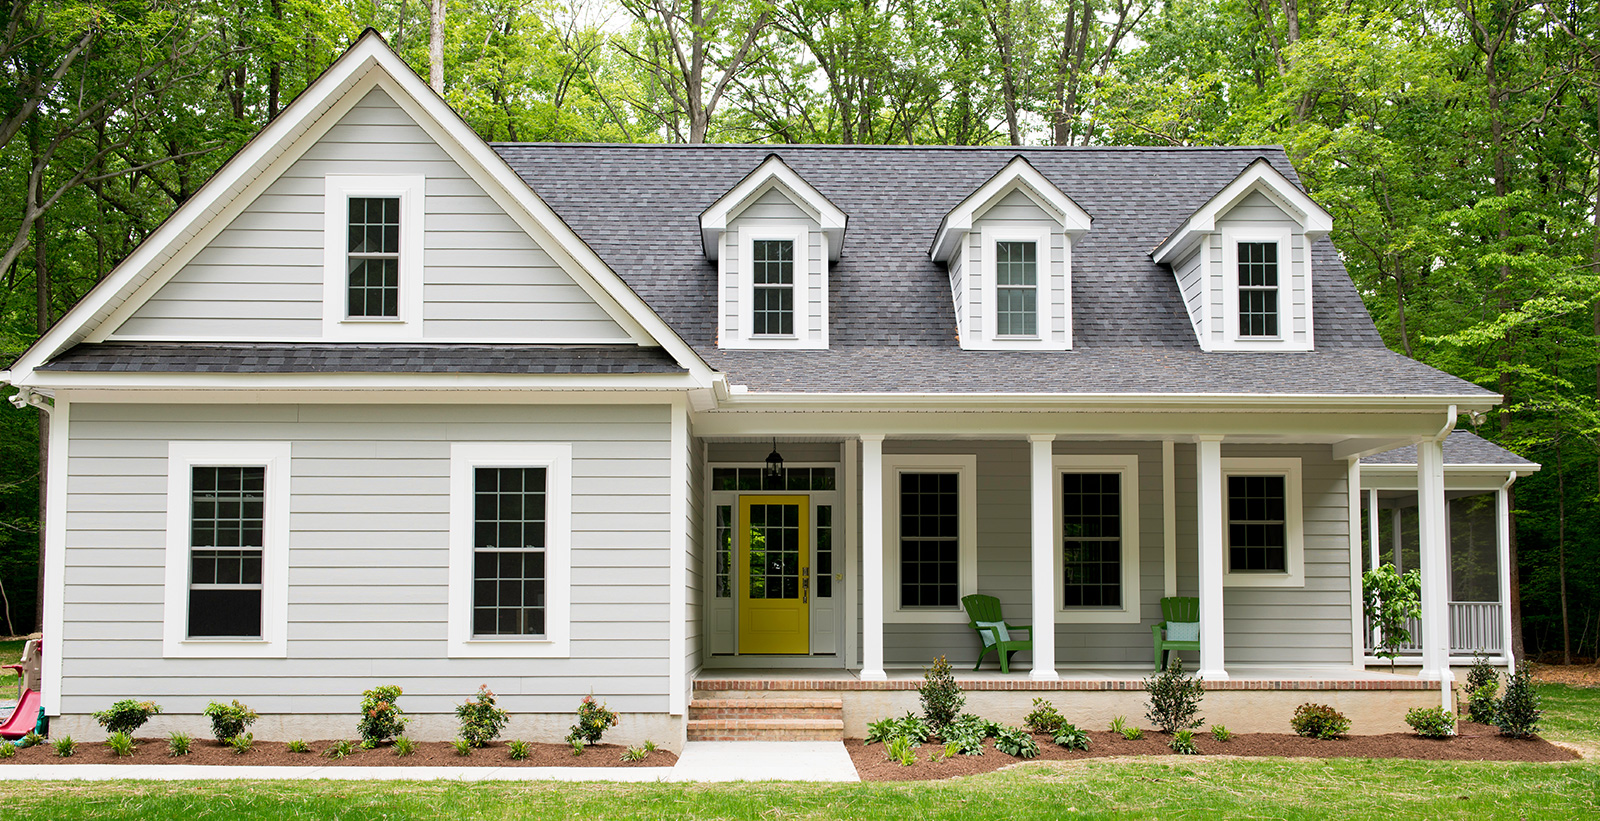 Farmhouse themed cottage house with light gray walls, white trim, and yellow door.